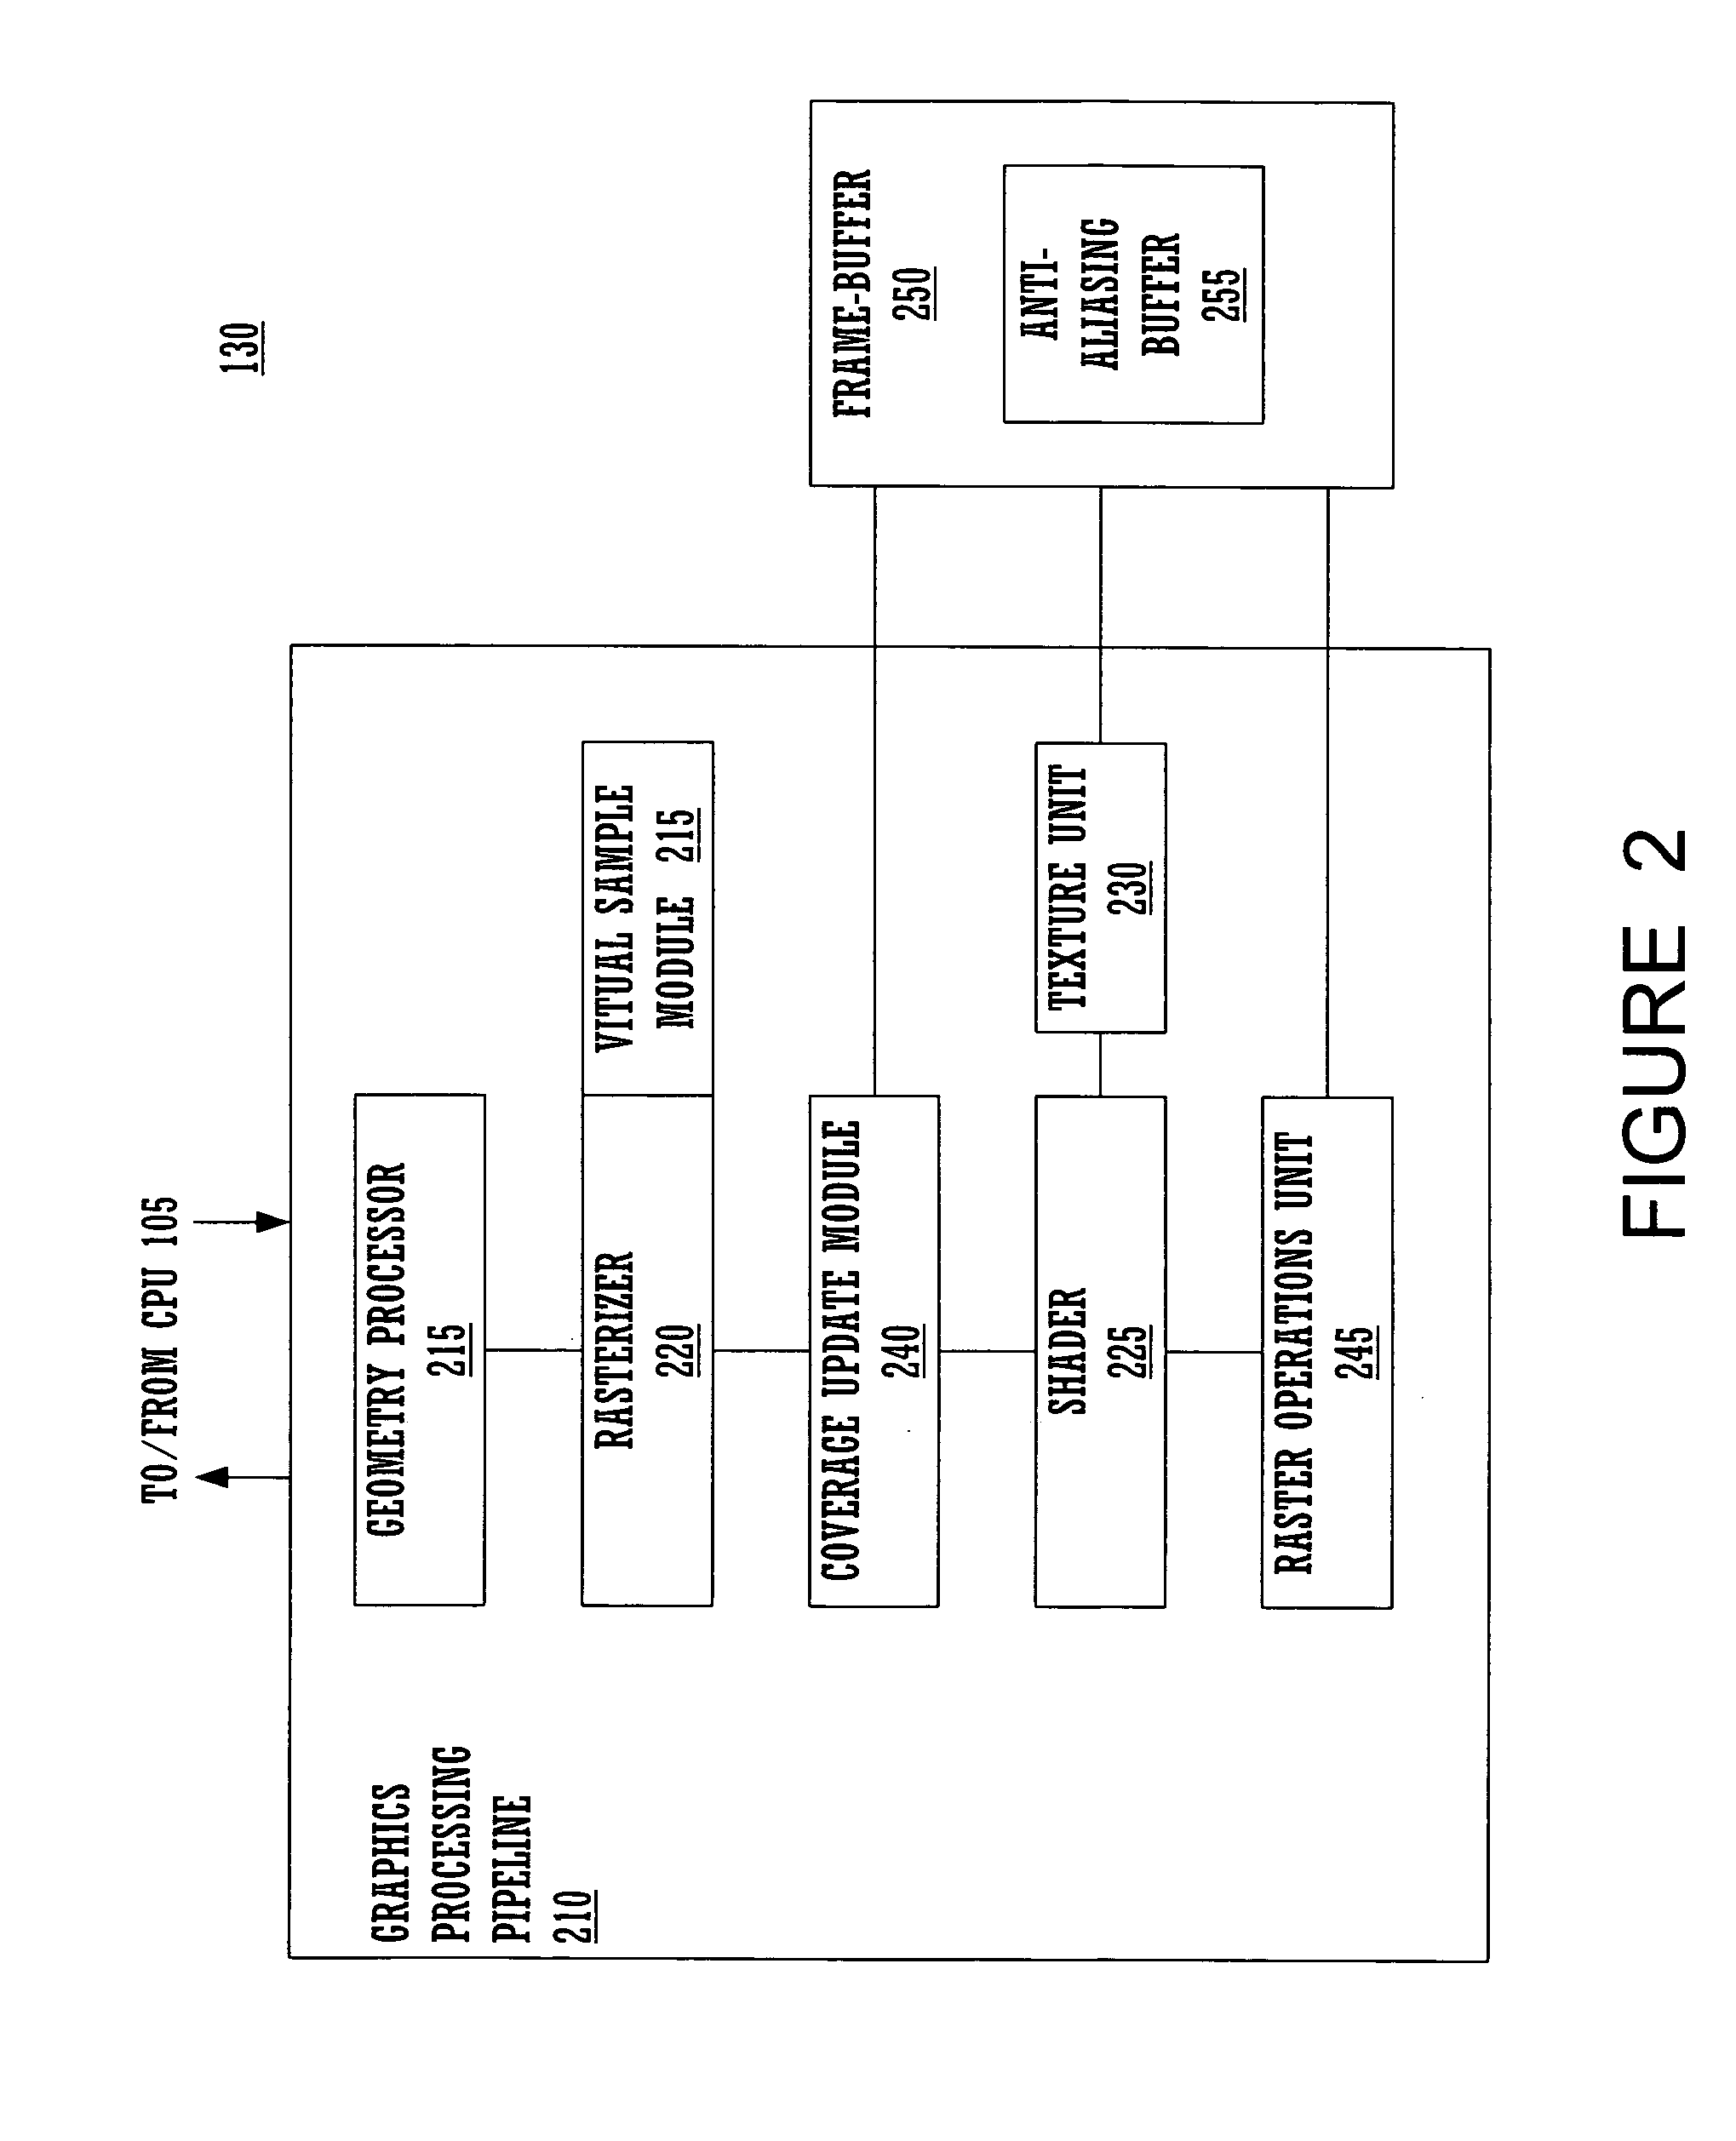 Writing coverage information to a framebuffer in a computer graphics system